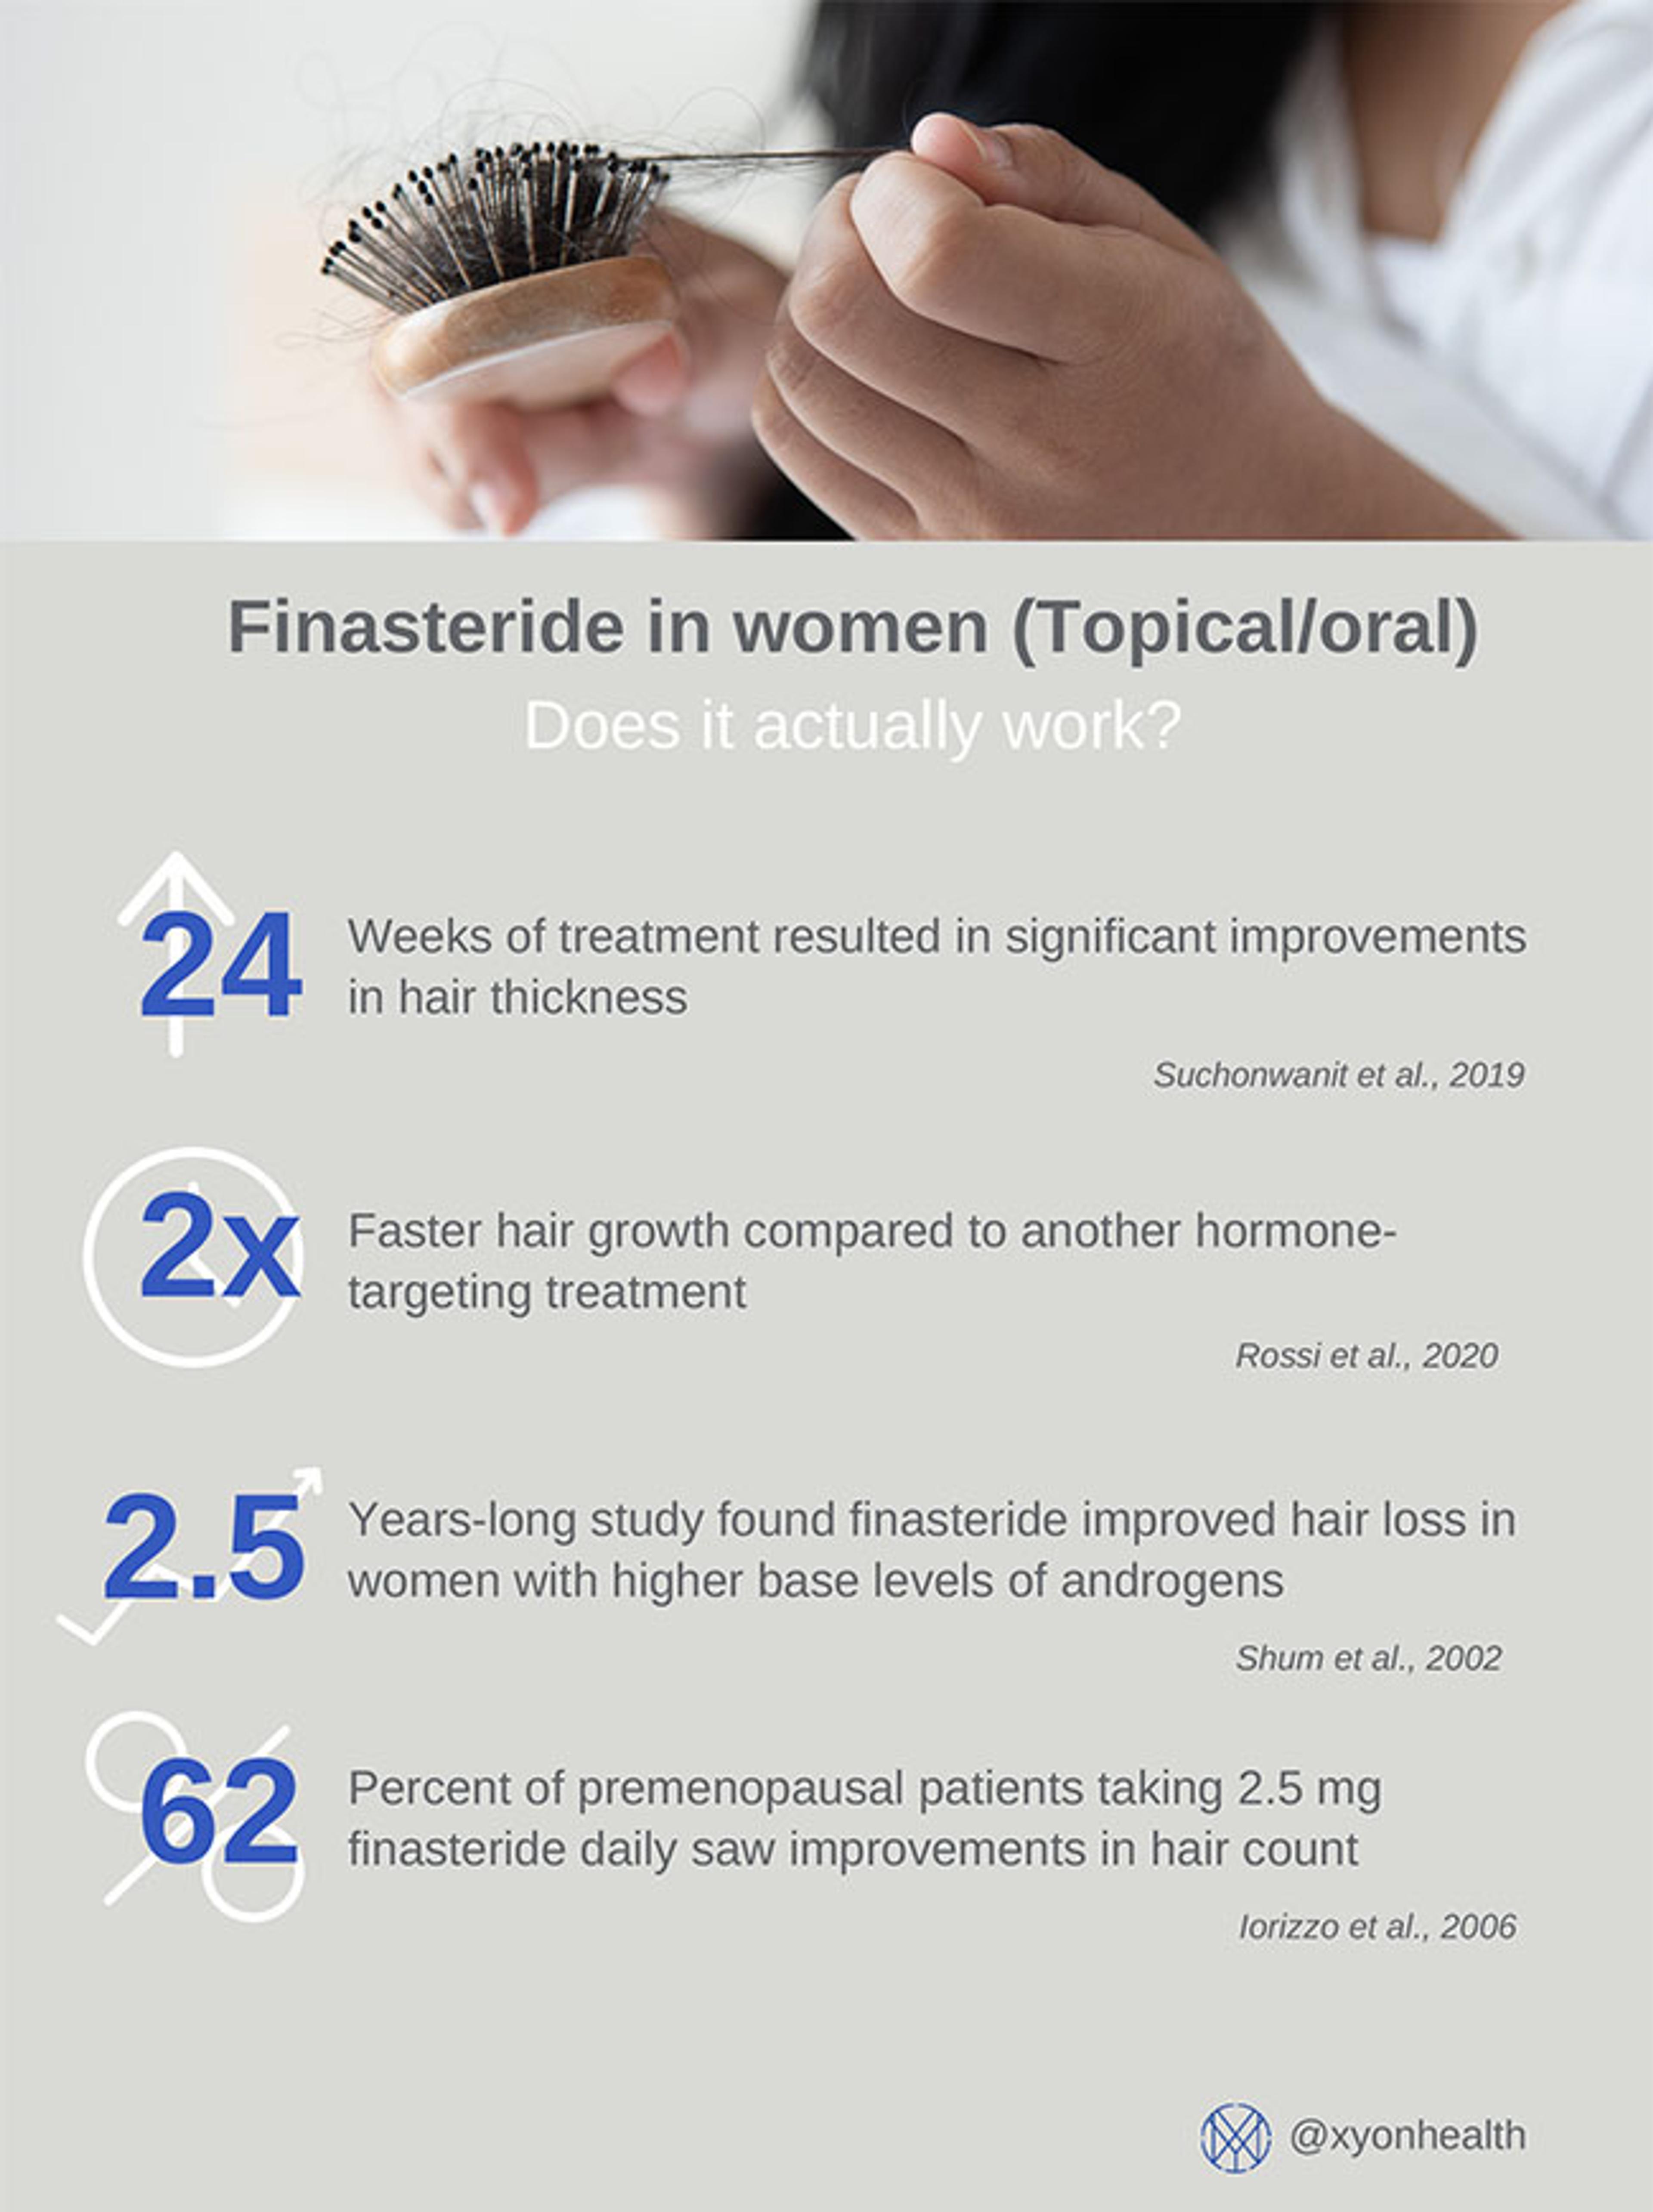 Summary of study data on efficacy of topical finasteride for women.